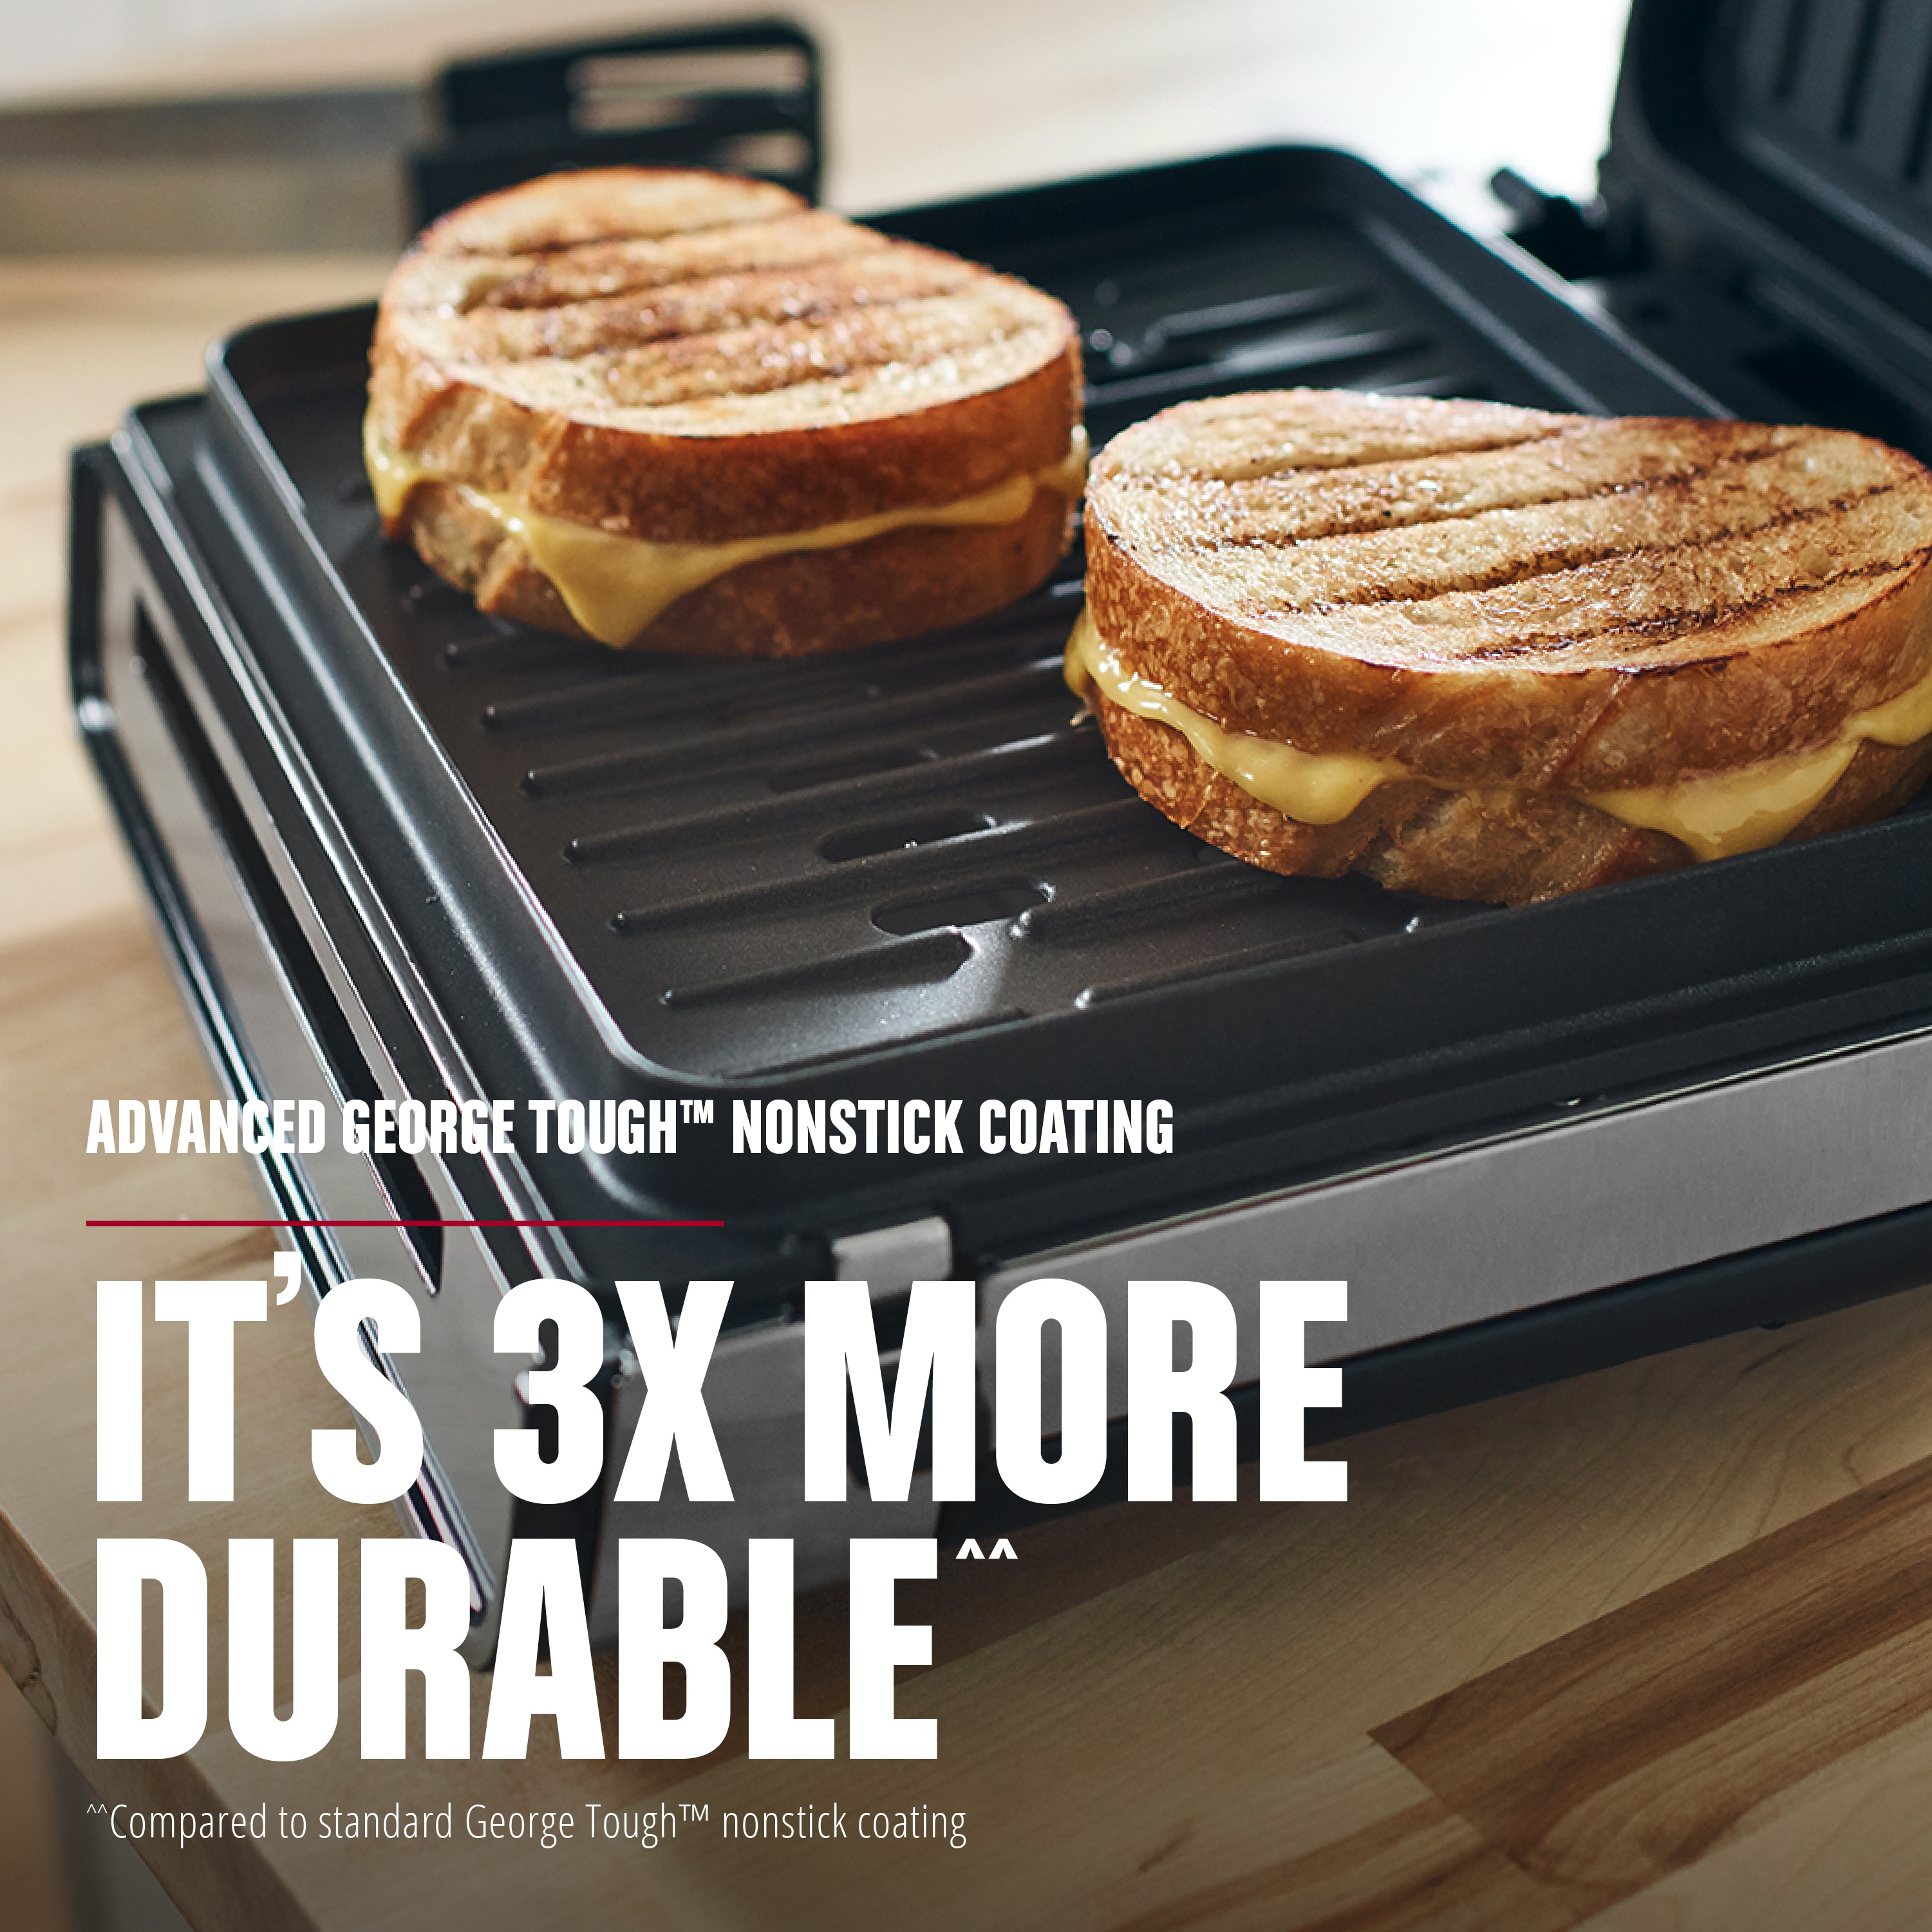 George Foreman Contact Smokeless - Ready Grill, Family Size (4-6 Servings), GRS6090B-1 - image 3 of 8